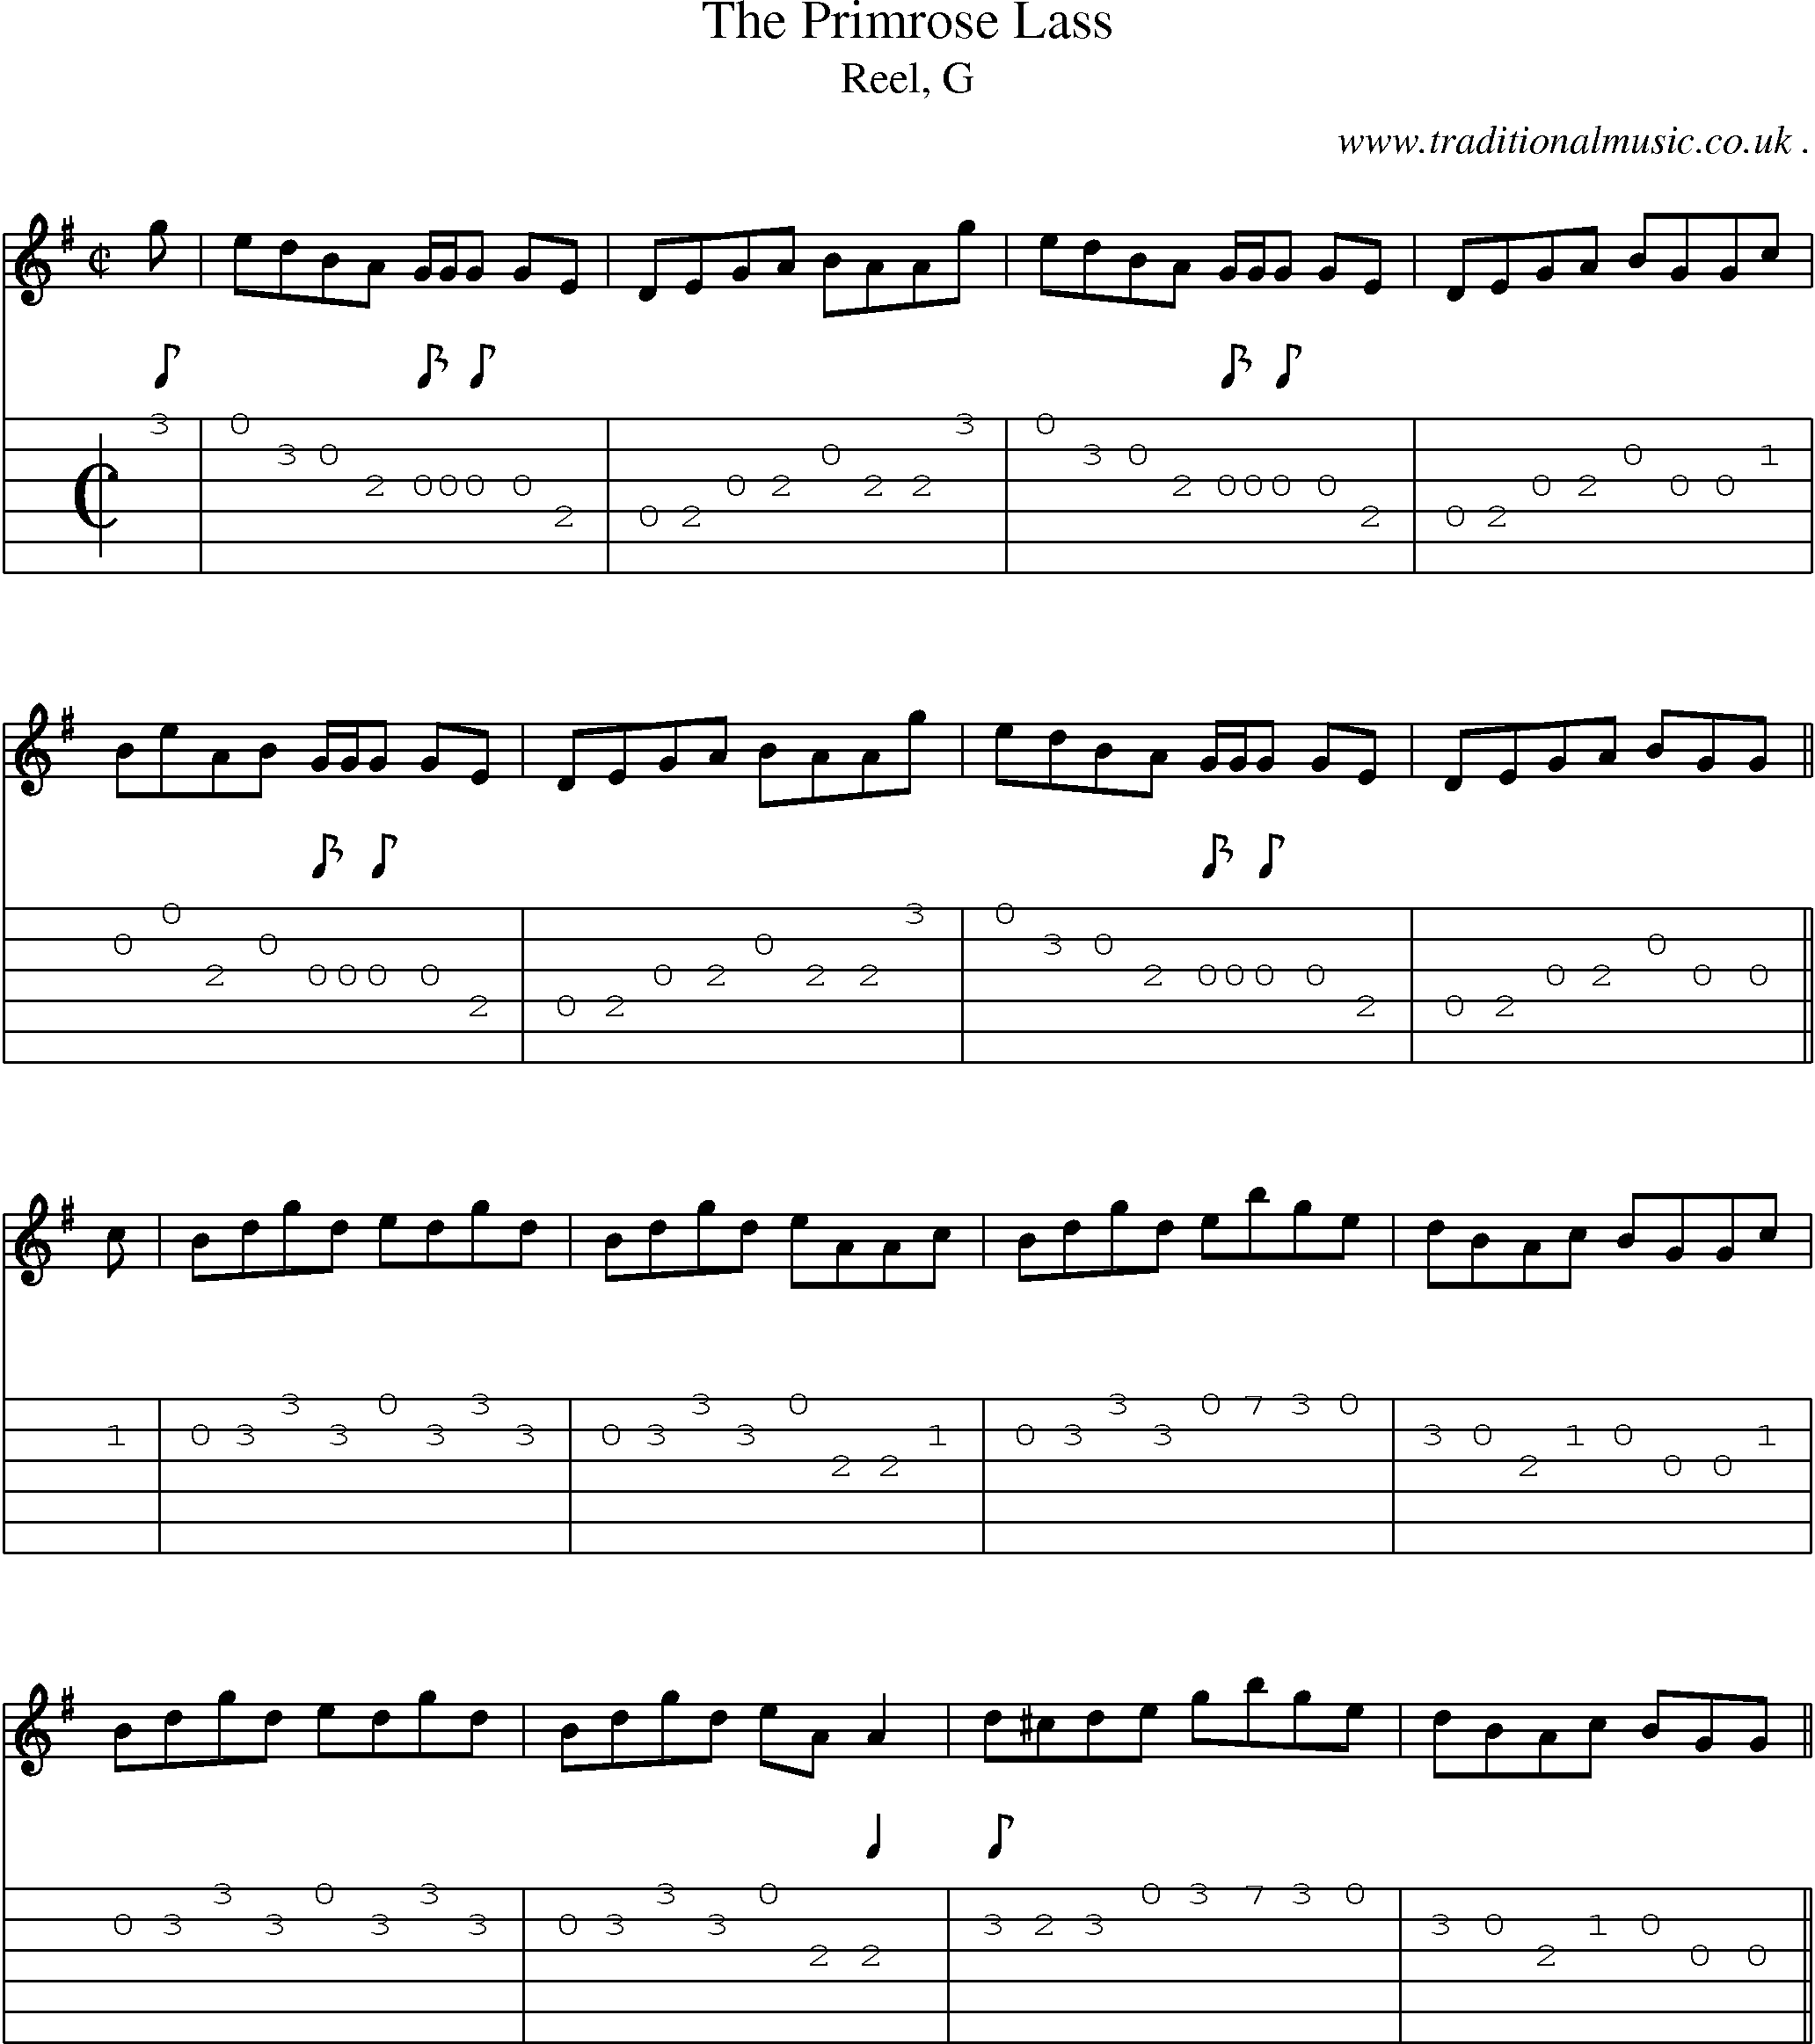 Sheet-music  score, Chords and Guitar Tabs for The Primrose Lass